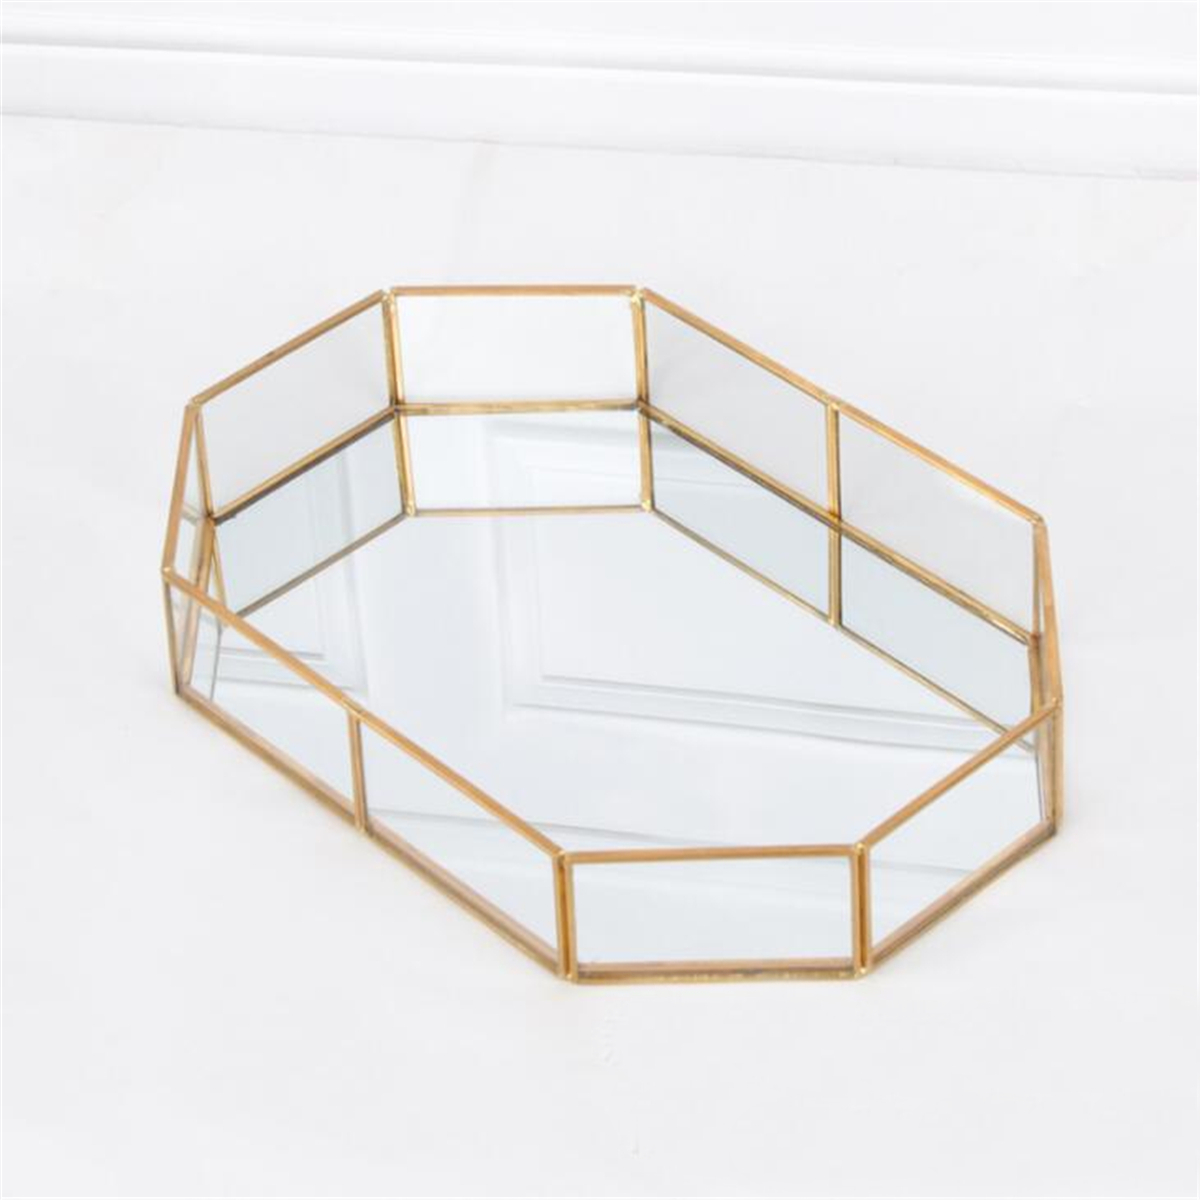 2-Size-Mirror-Glass-Tray-Octagon-Cosmetic-Makeup-Desktop-Organizer-Jewelry-Display-Stand-Holder-1382768-5